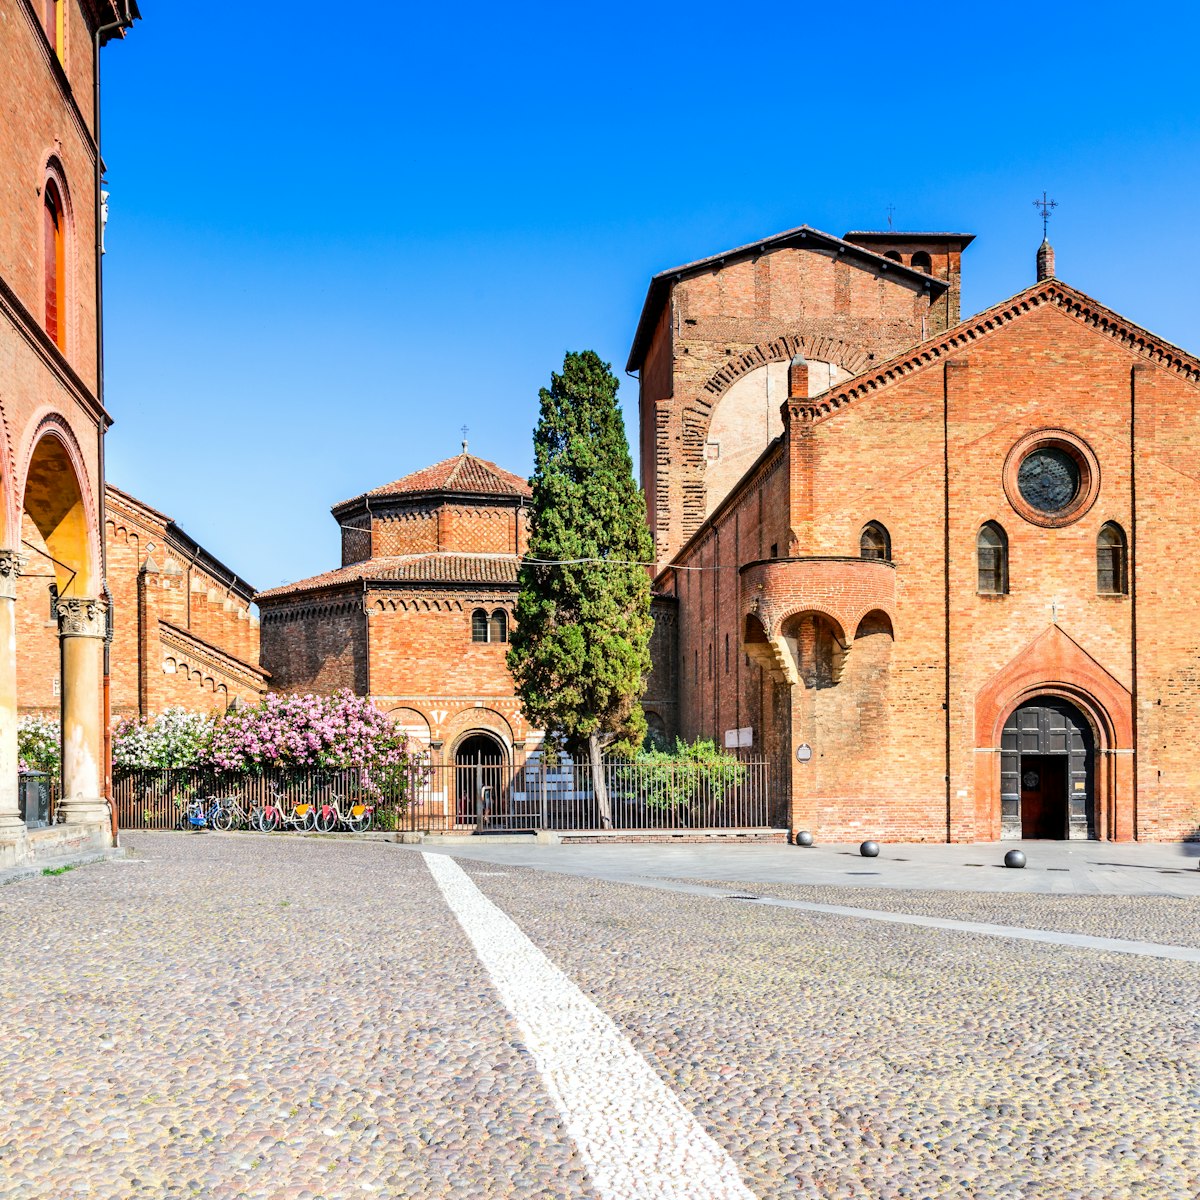 Bologna, Italy - The basilica of Santo Stefano, Holy Jerusalem, known as Seven Churches. Emilia-Romagna region.; Shutterstock ID 660489289; purchase_order: 65050; job: poi; client: ; other:
660489289